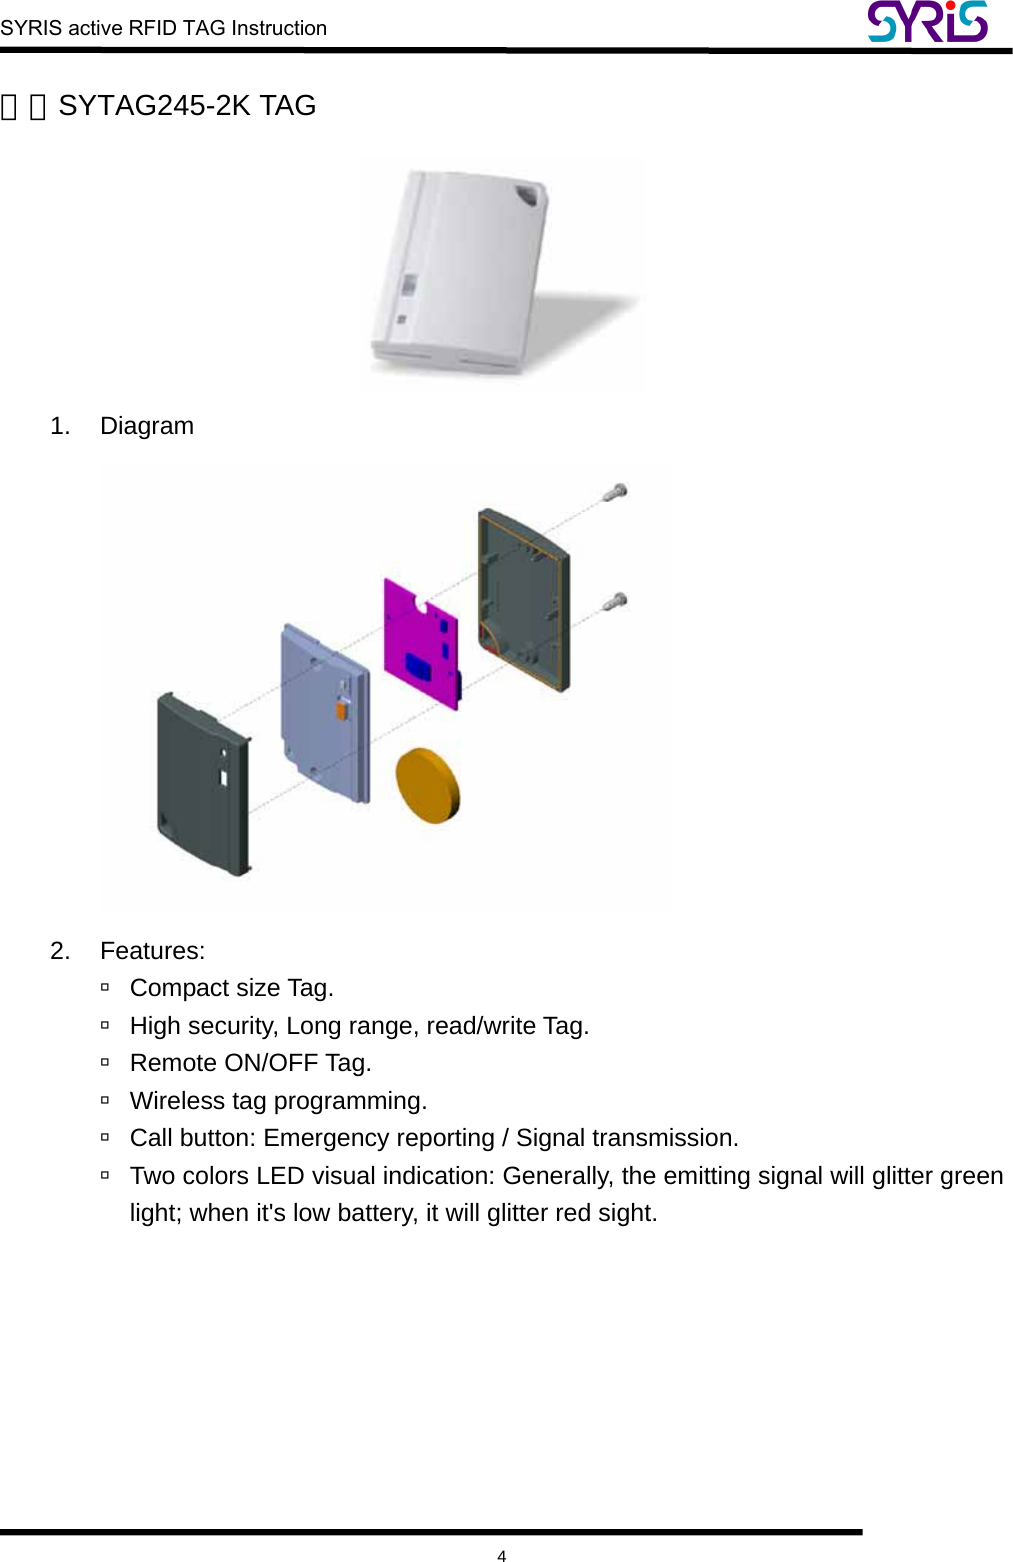  SYRIS active RFID TAG Instruction    4 三、SYTAG245-2K TAG  1. Diagram  2. Features:  à Compact size Tag. à  High security, Long range, read/write Tag. à Remote ON/OFF Tag. à  Wireless tag programming. à  Call button: Emergency reporting / Signal transmission. à  Two colors LED visual indication: Generally, the emitting signal will glitter green light; when it&apos;s low battery, it will glitter red sight.  